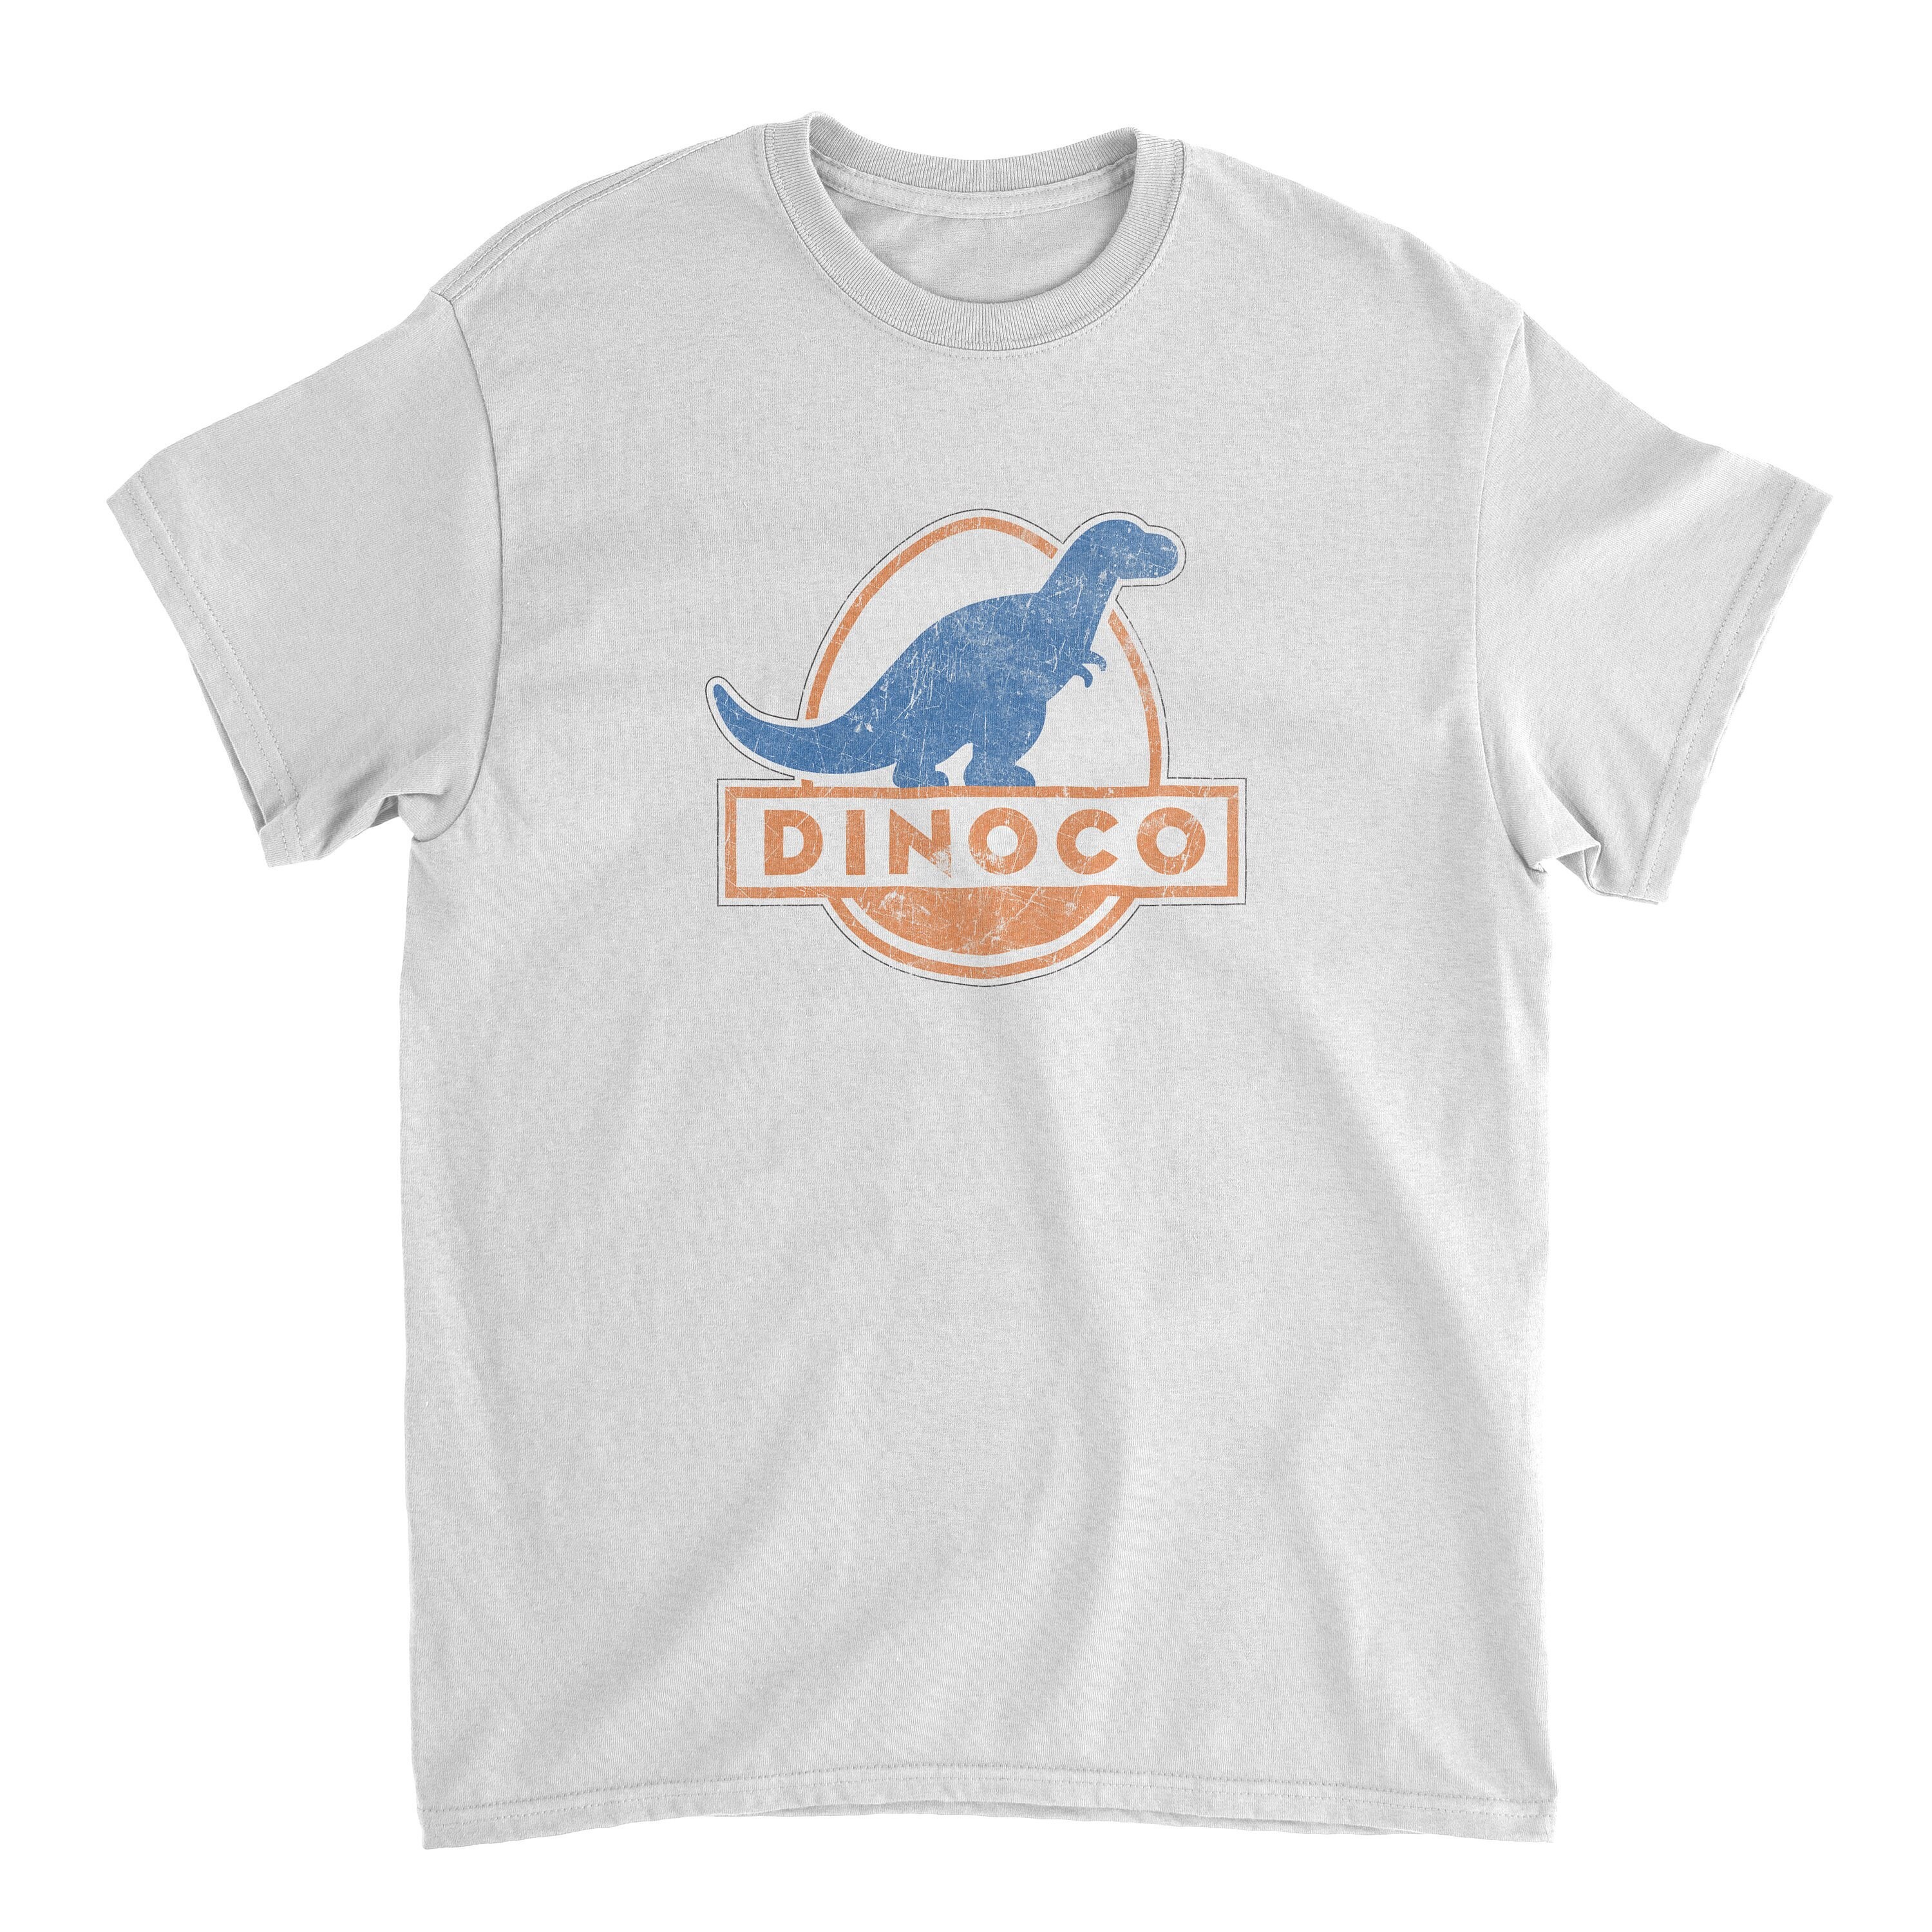 Cars Dinoco T-shirt Toy Story Gas Station | Etsy